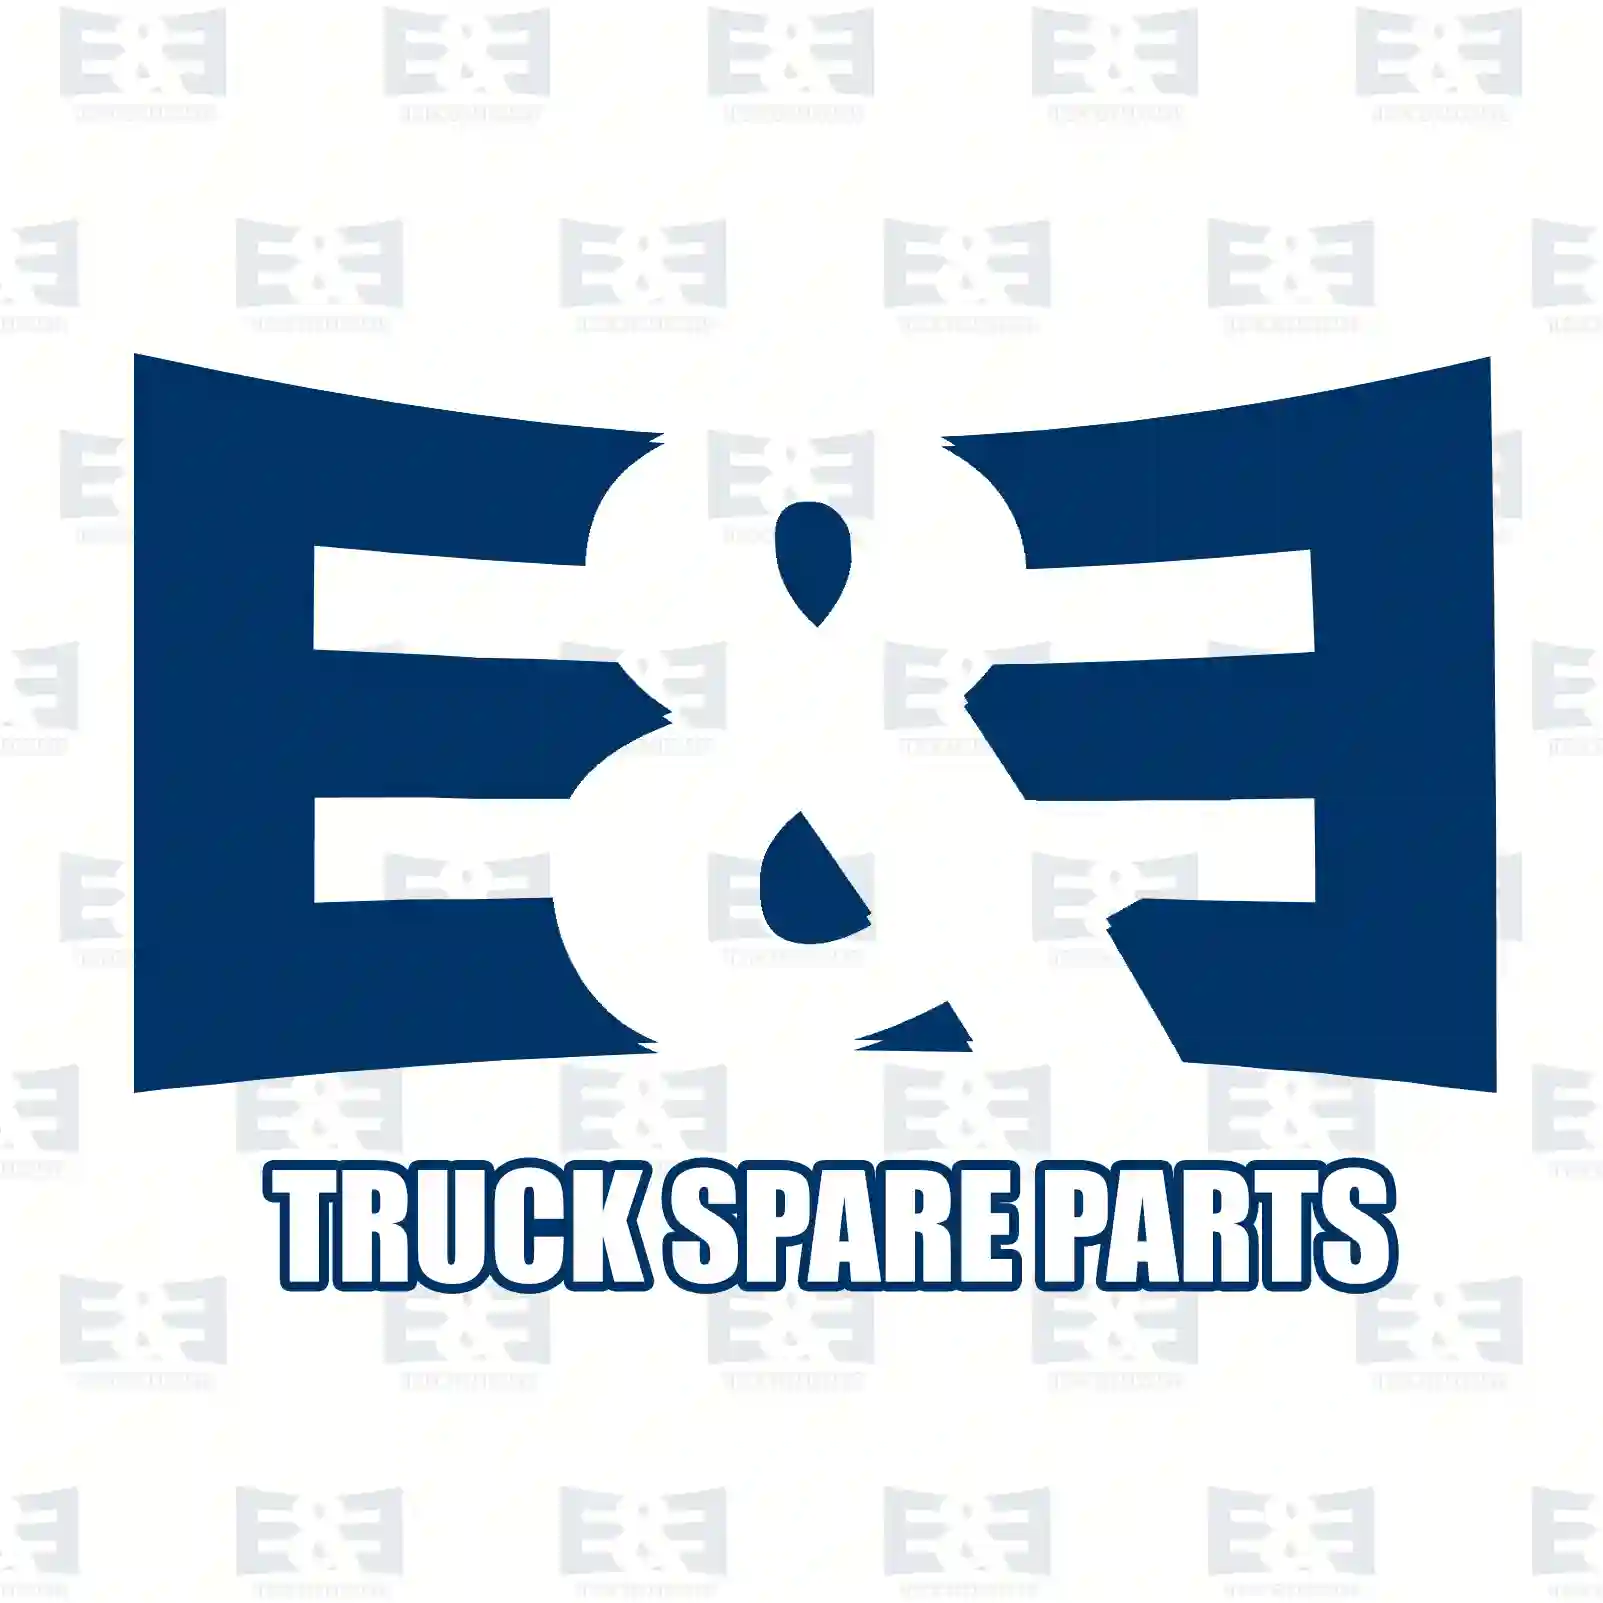  Oil filter insert, gearbox, complete with gasket kit || E&E Truck Spare Parts | Truck Spare Parts, Auotomotive Spare Parts